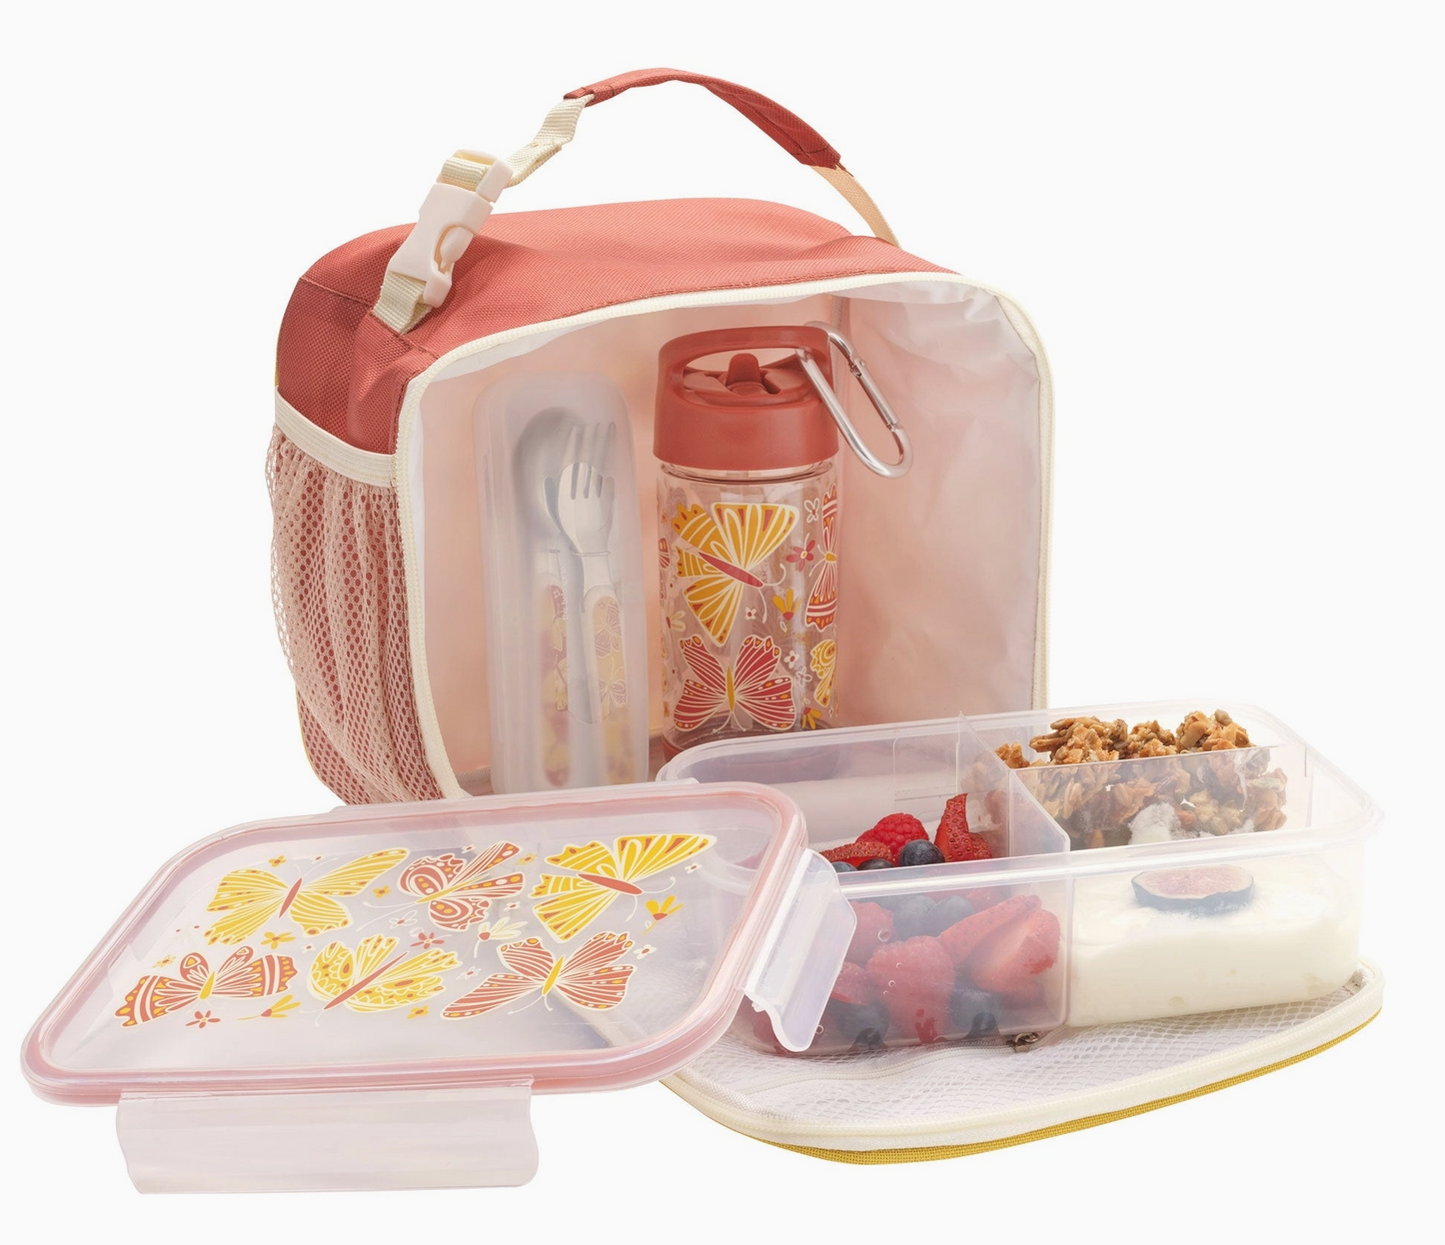 Super Zippee Lunch Tote | Boho Butterfly